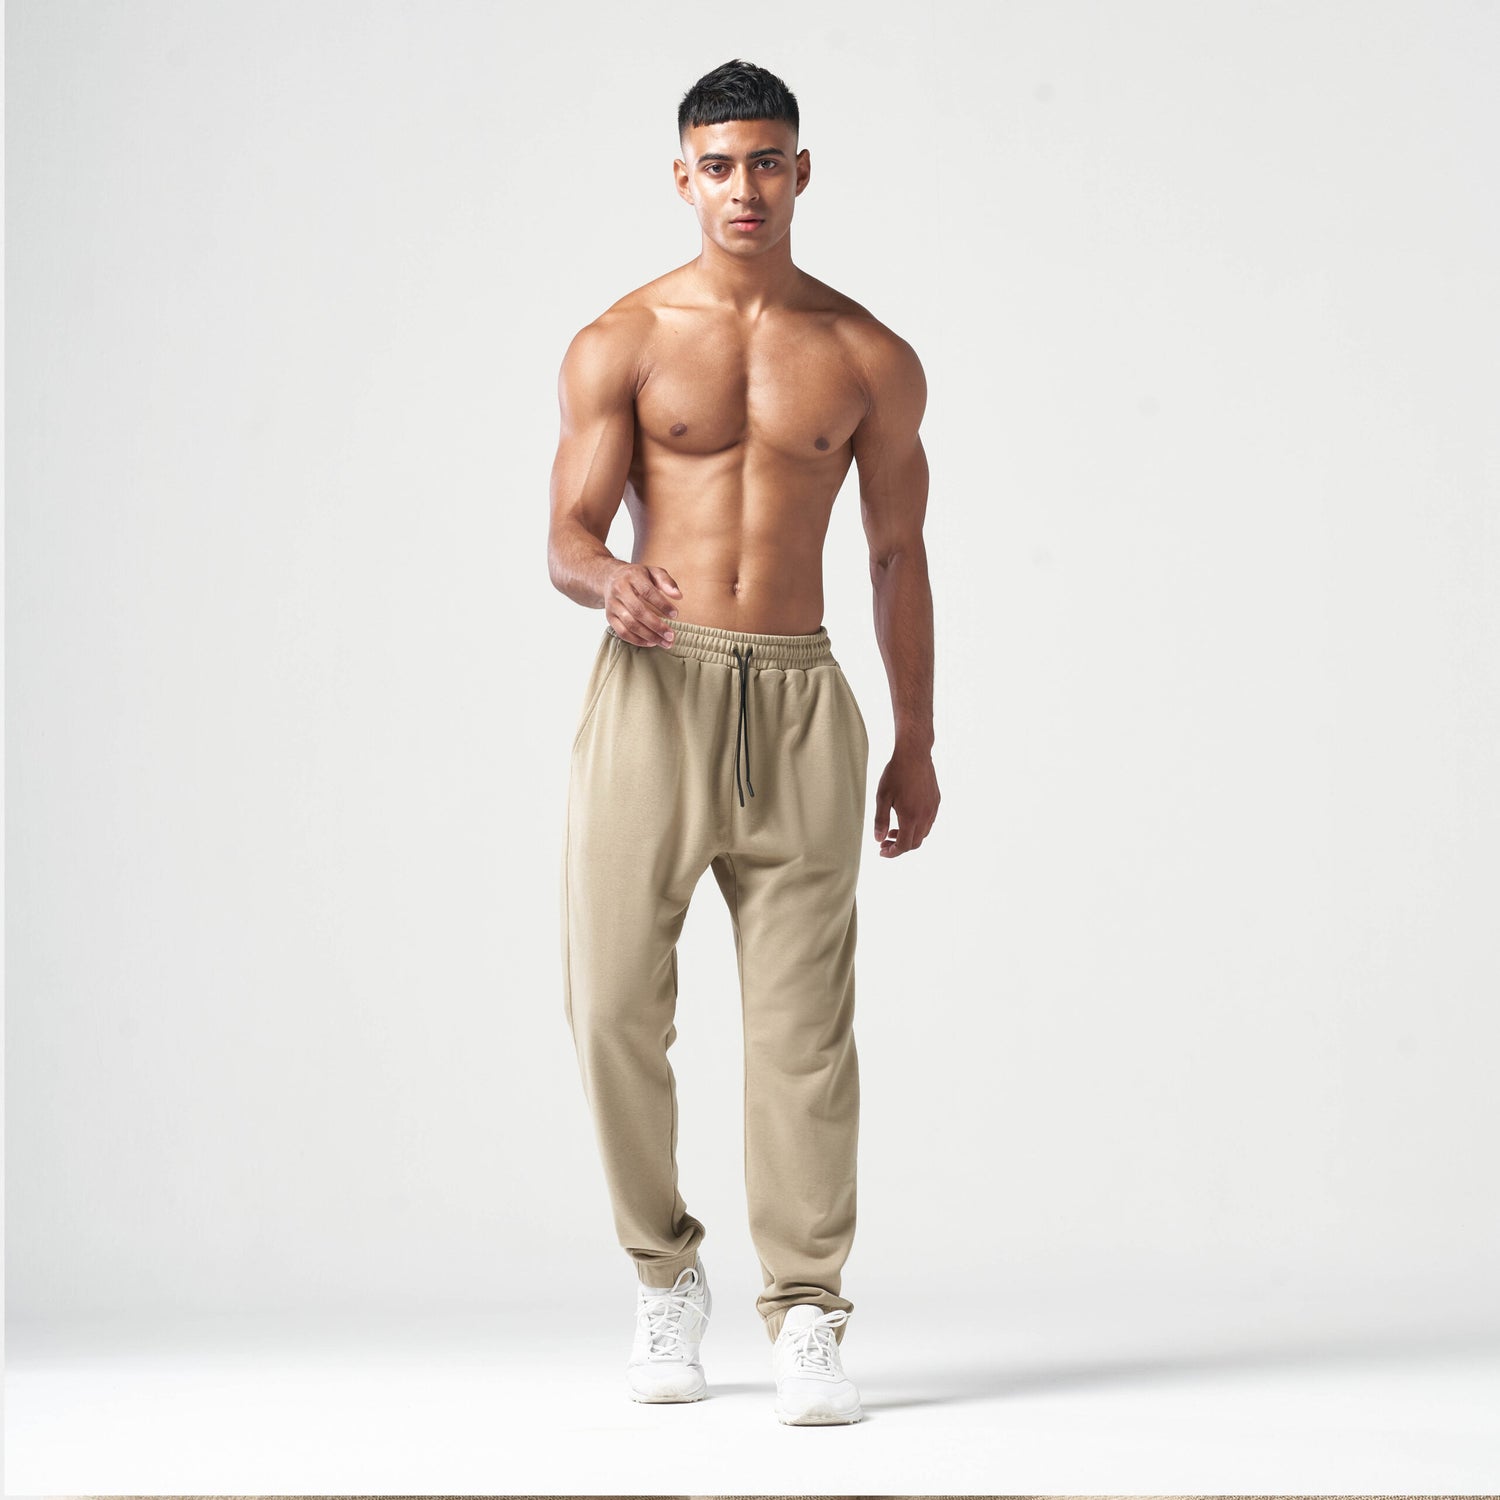 Joggers 101  Mens joggers outfit, Mens outfits, Pants outfit men